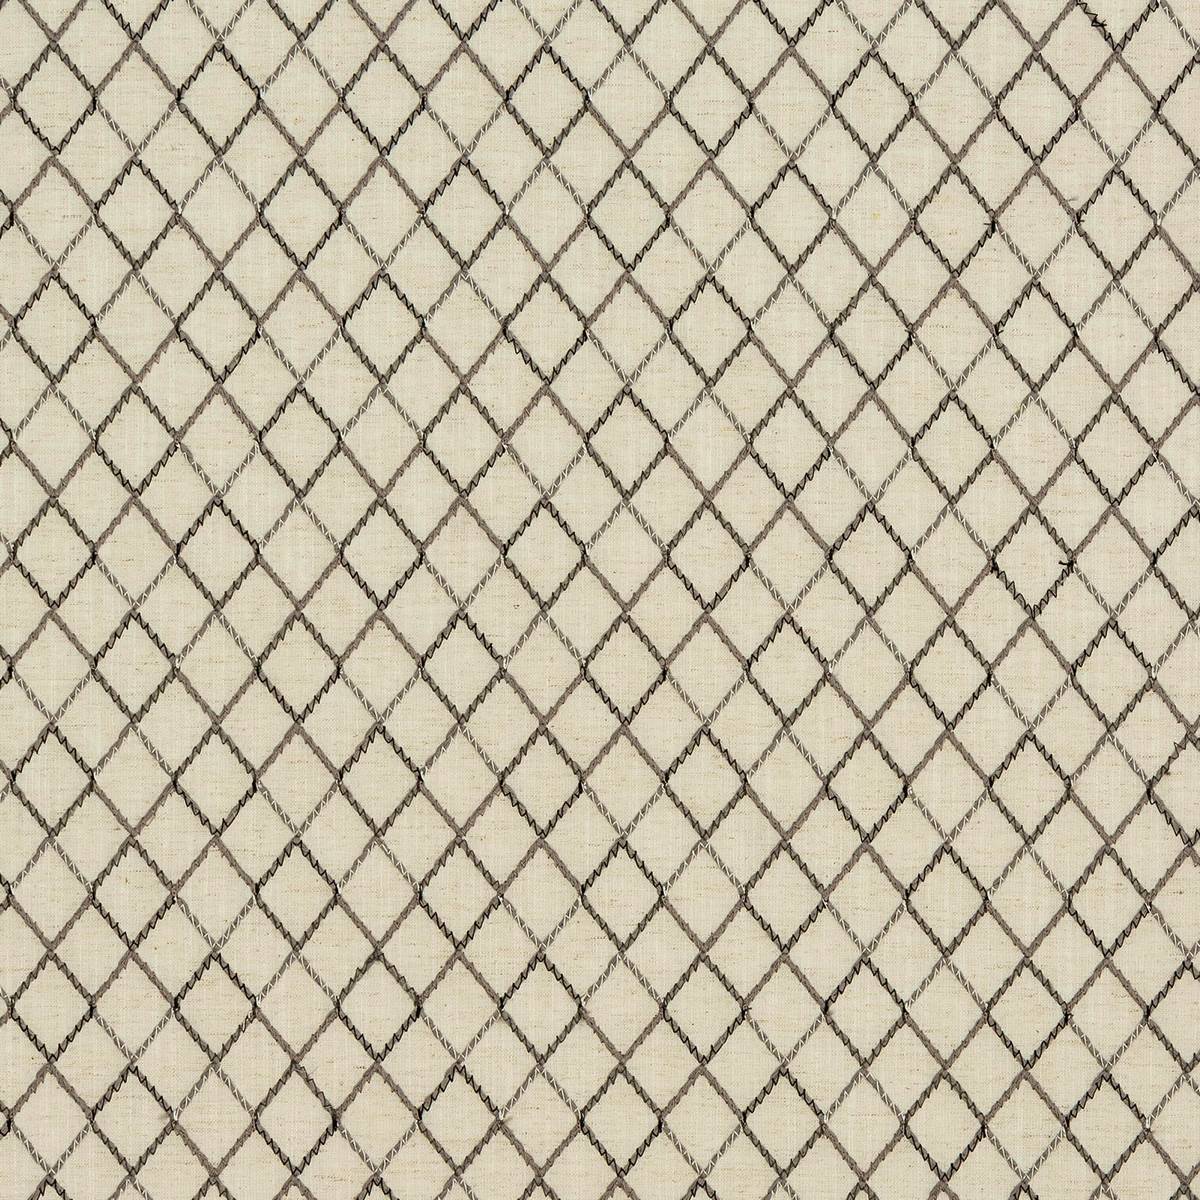 Woburn Natural Fabric by Porter & Stone